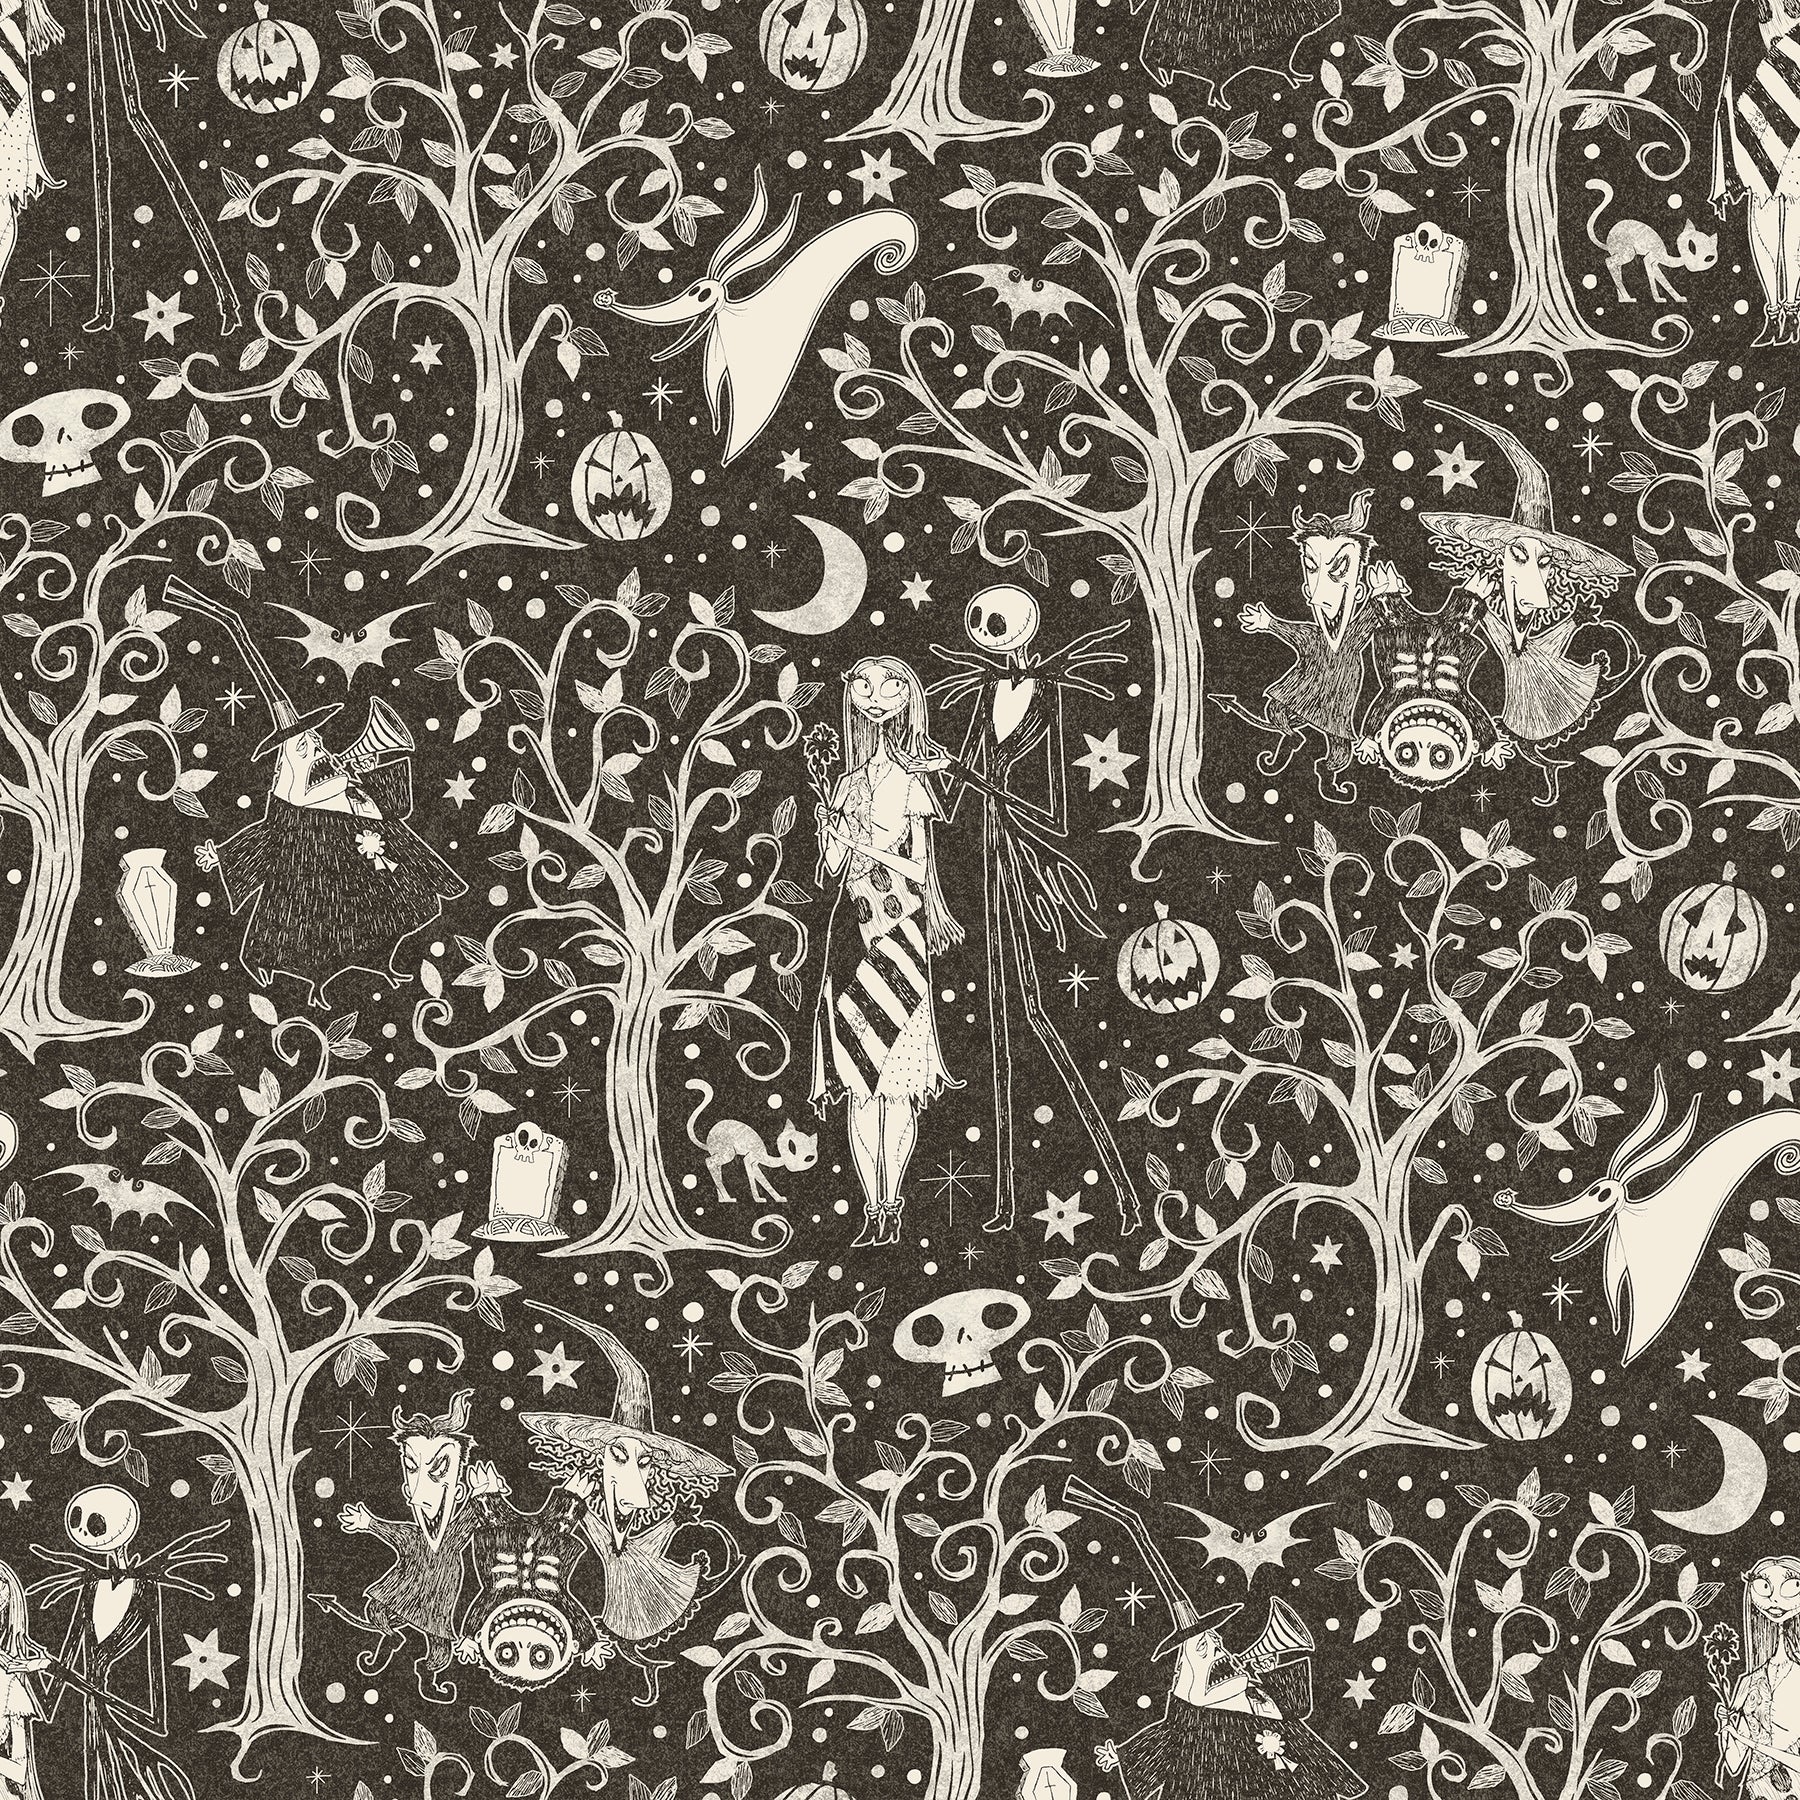 Disney Tim Burton's The Nightmare Before Christmas Forest Peel & Stick Wallpaper Peel and Stick Wallpaper RoomMates Roll Sepia 